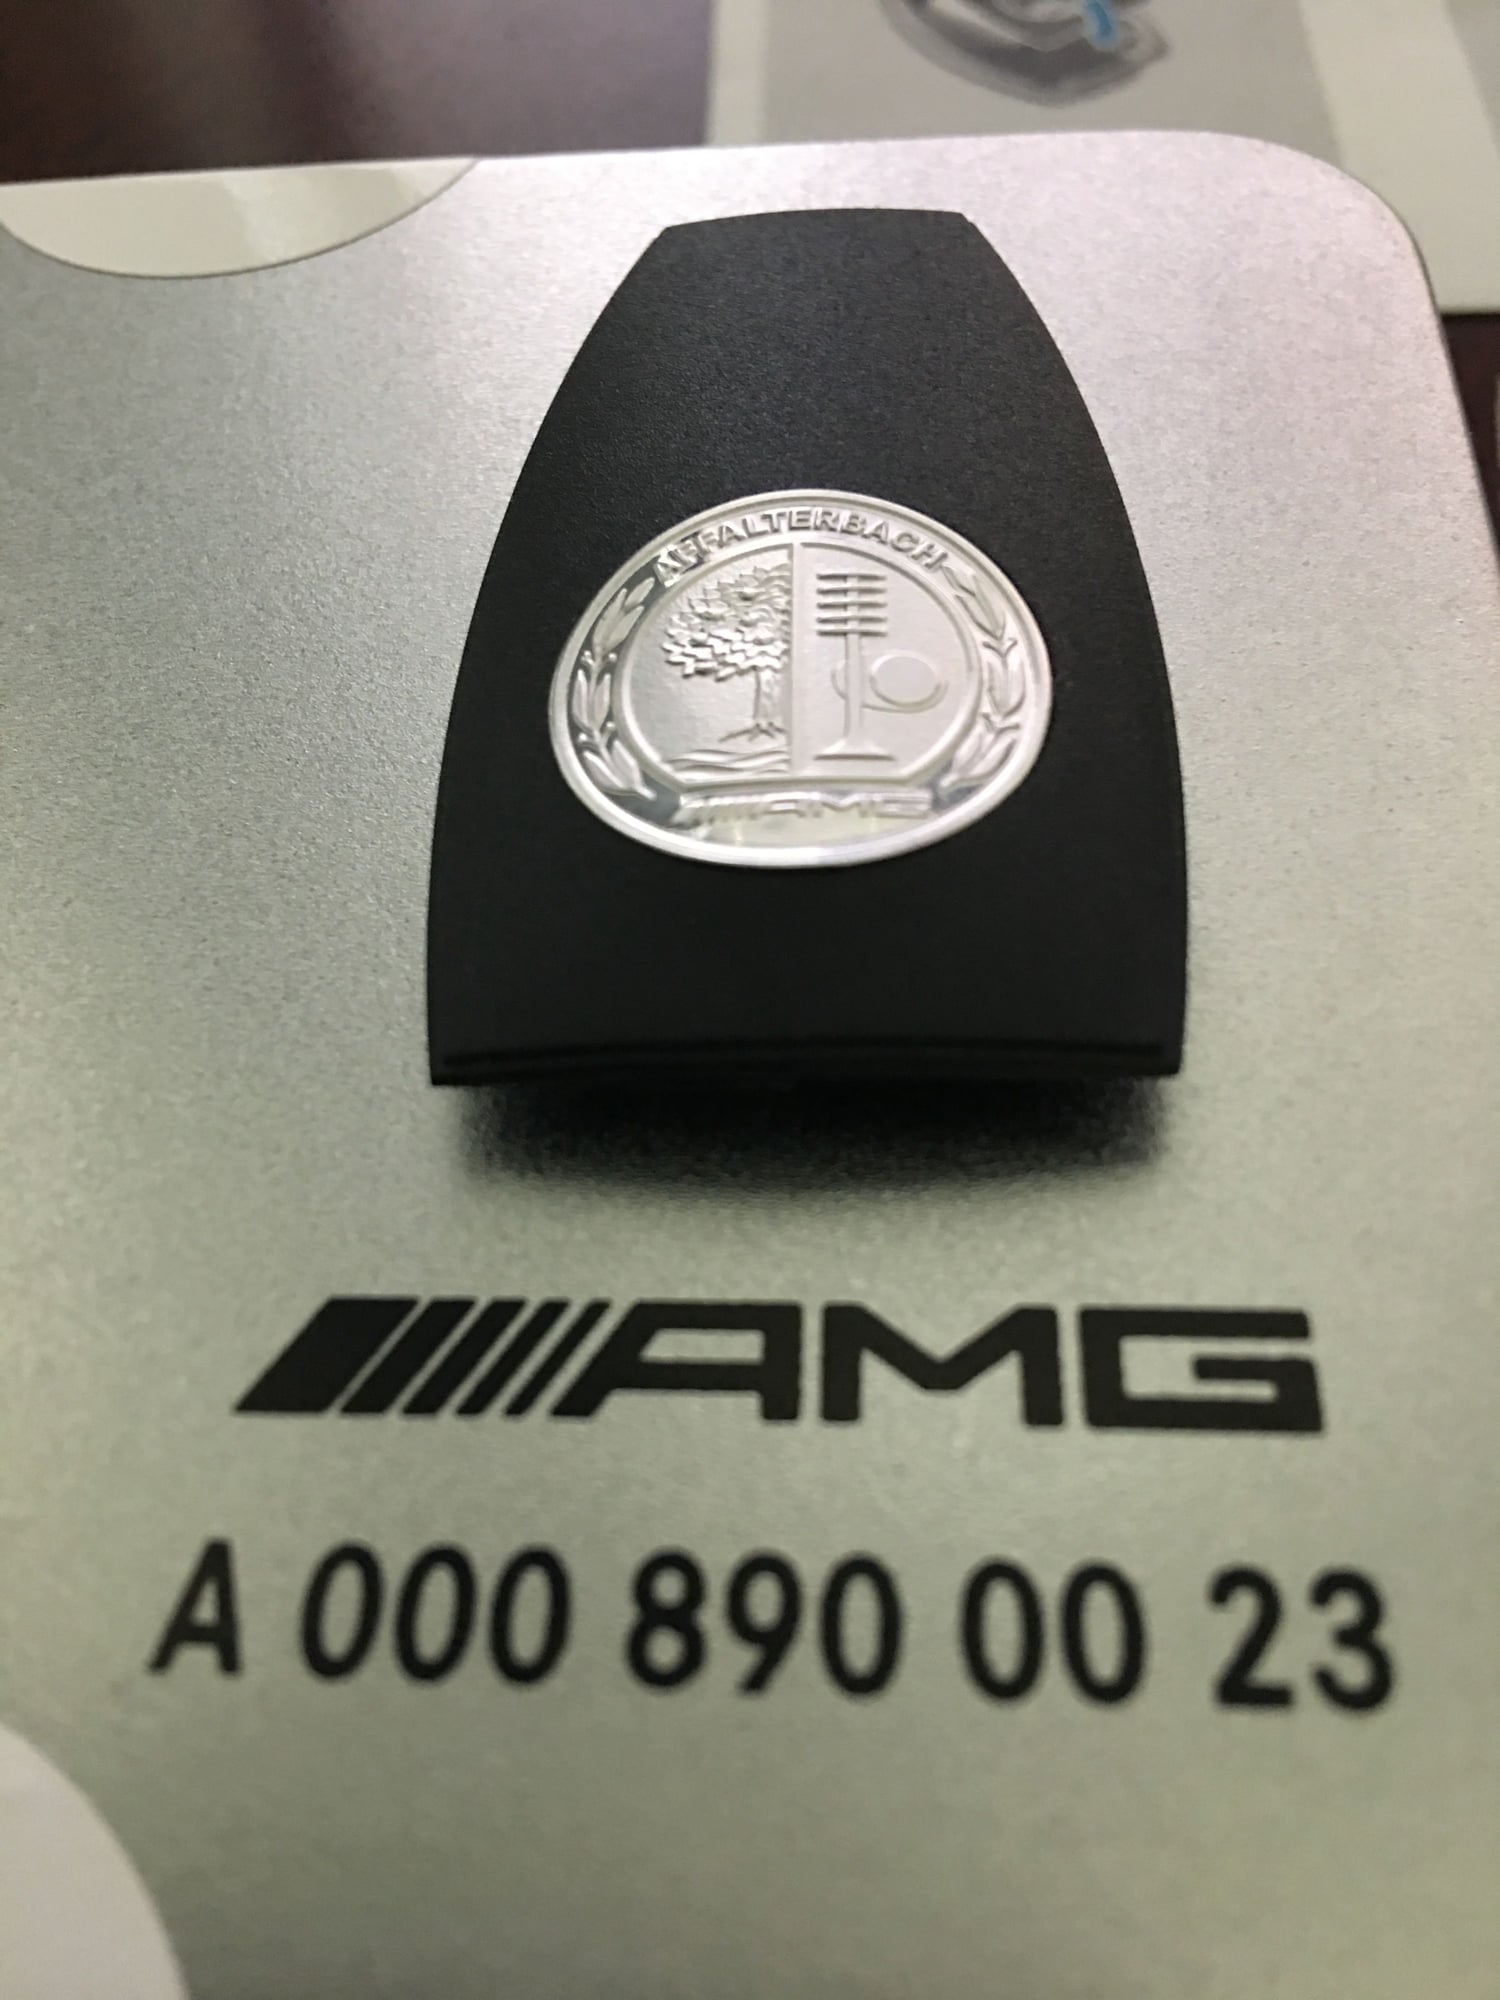 Accessories - AMG Key Crest Fob - 2018 c63 Coupe (Will fit other key fobs) - New - Orlando, FL 32806, United States